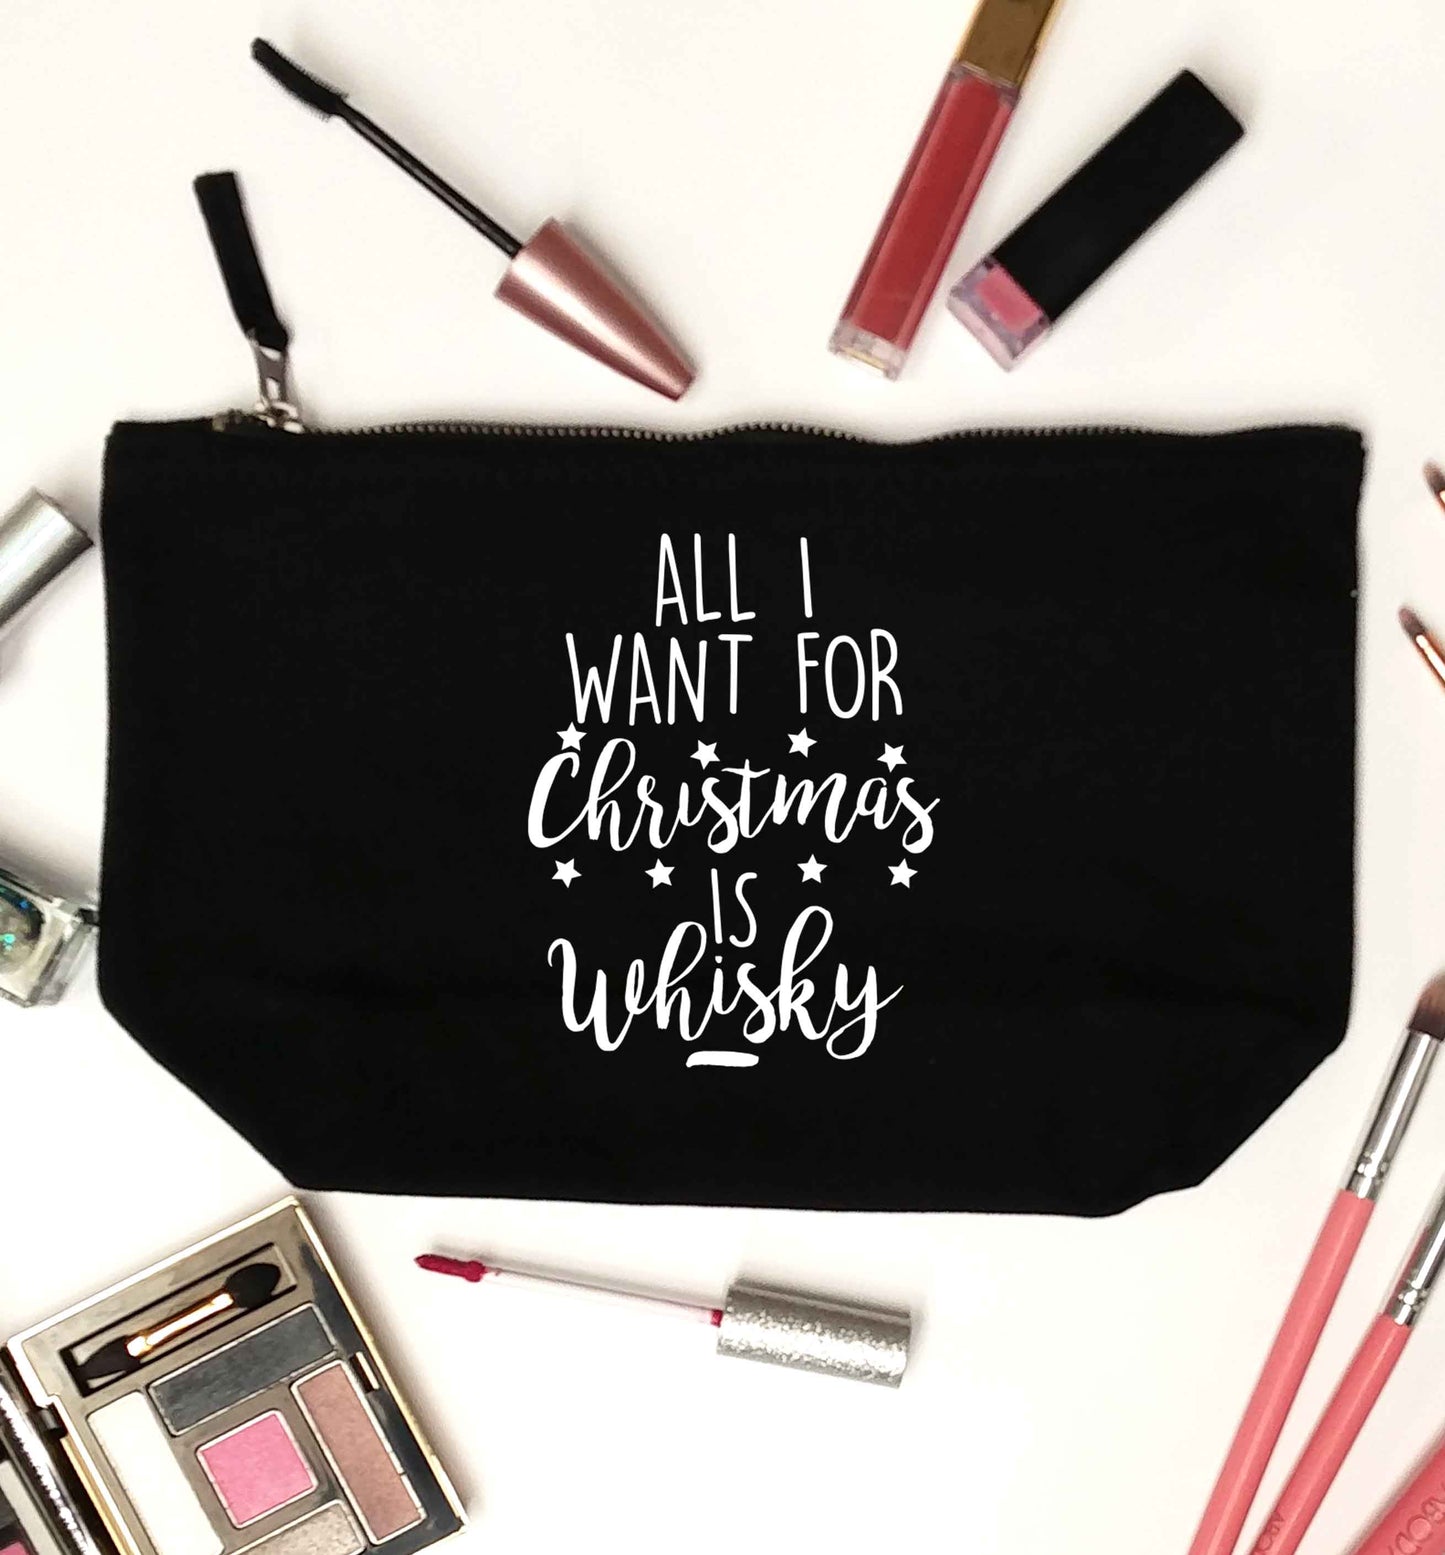 All I want for Christmas is whisky black makeup bag